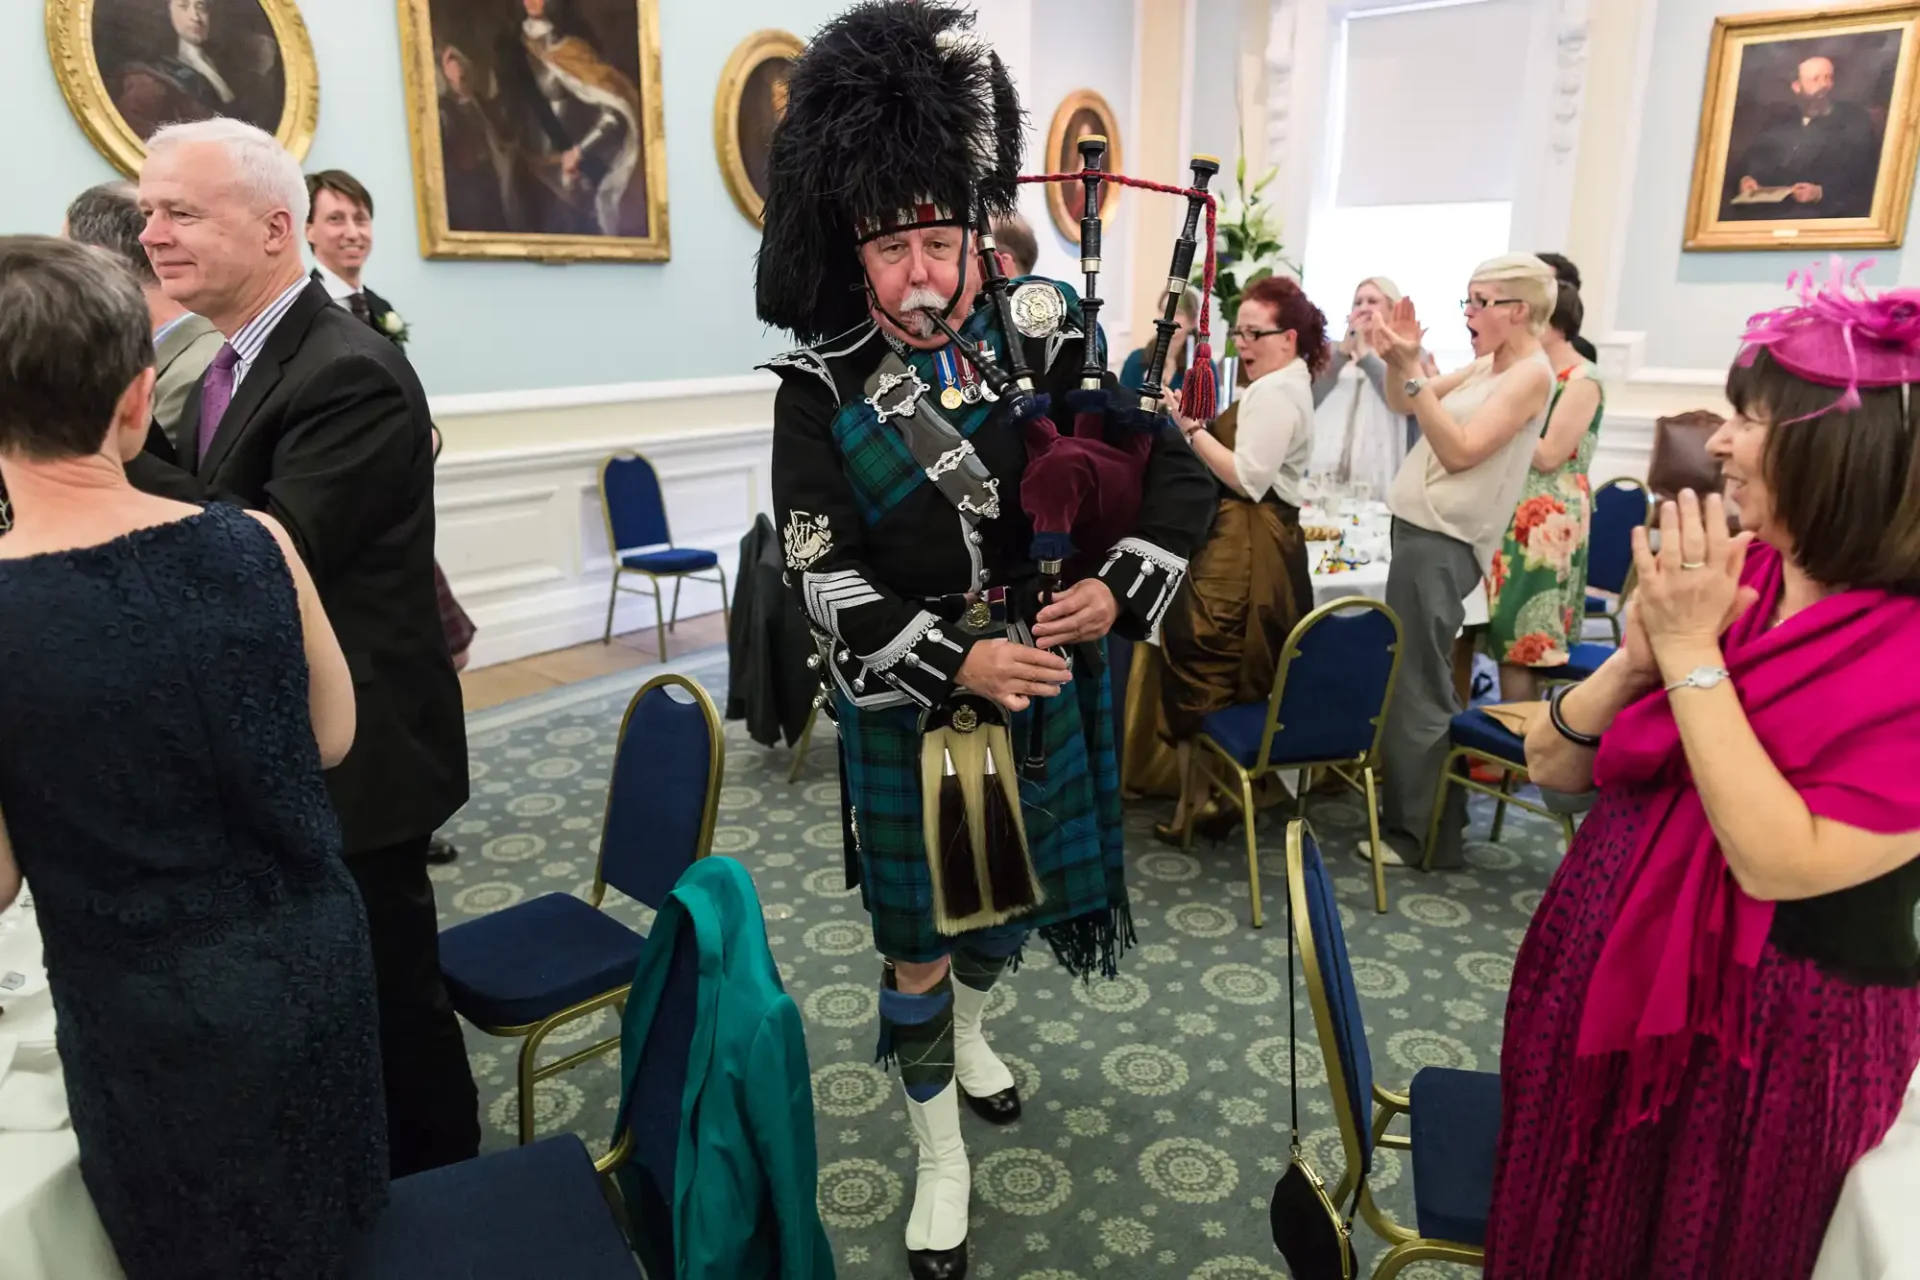 A bagpiper in traditional scottish attire playing at a formal indoor gathering with applauding guests.